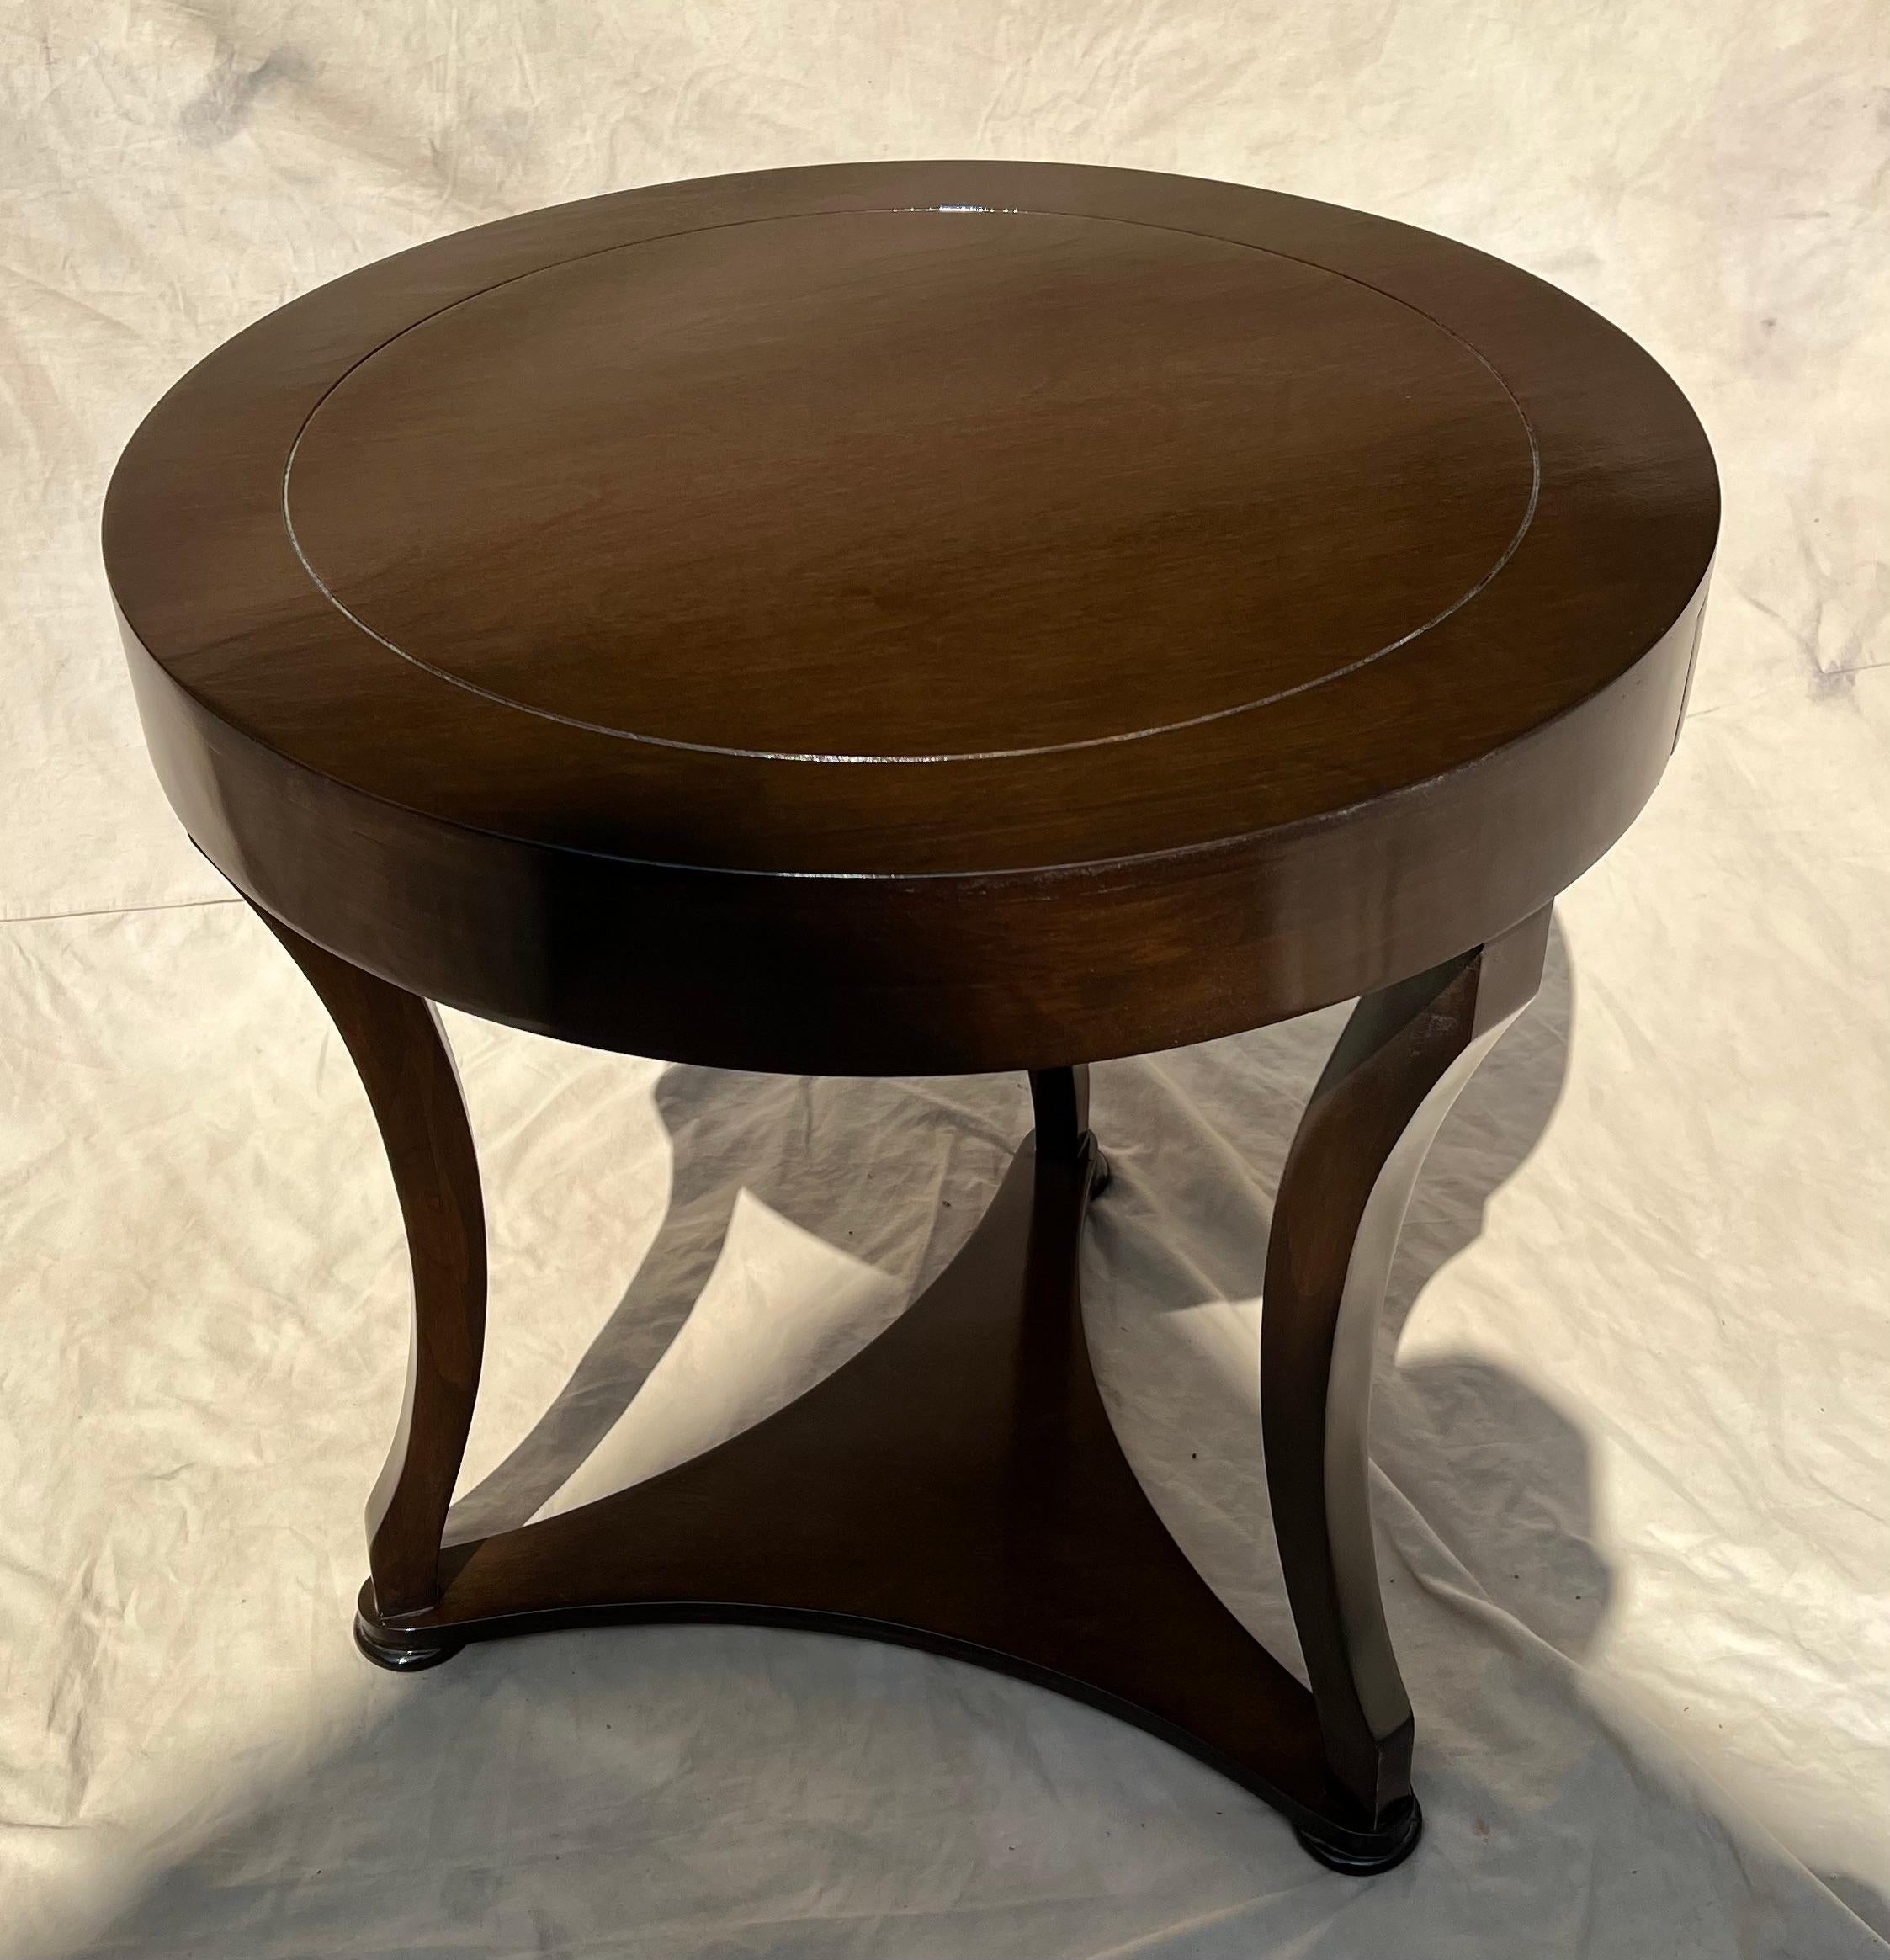 A walnut finish side table with drawer. The table is a wonderful side or bedside table. The finish is new and has no imperfections. We like the table without the drawer showing (turning the drawer to the back), however, if you need to store remotes